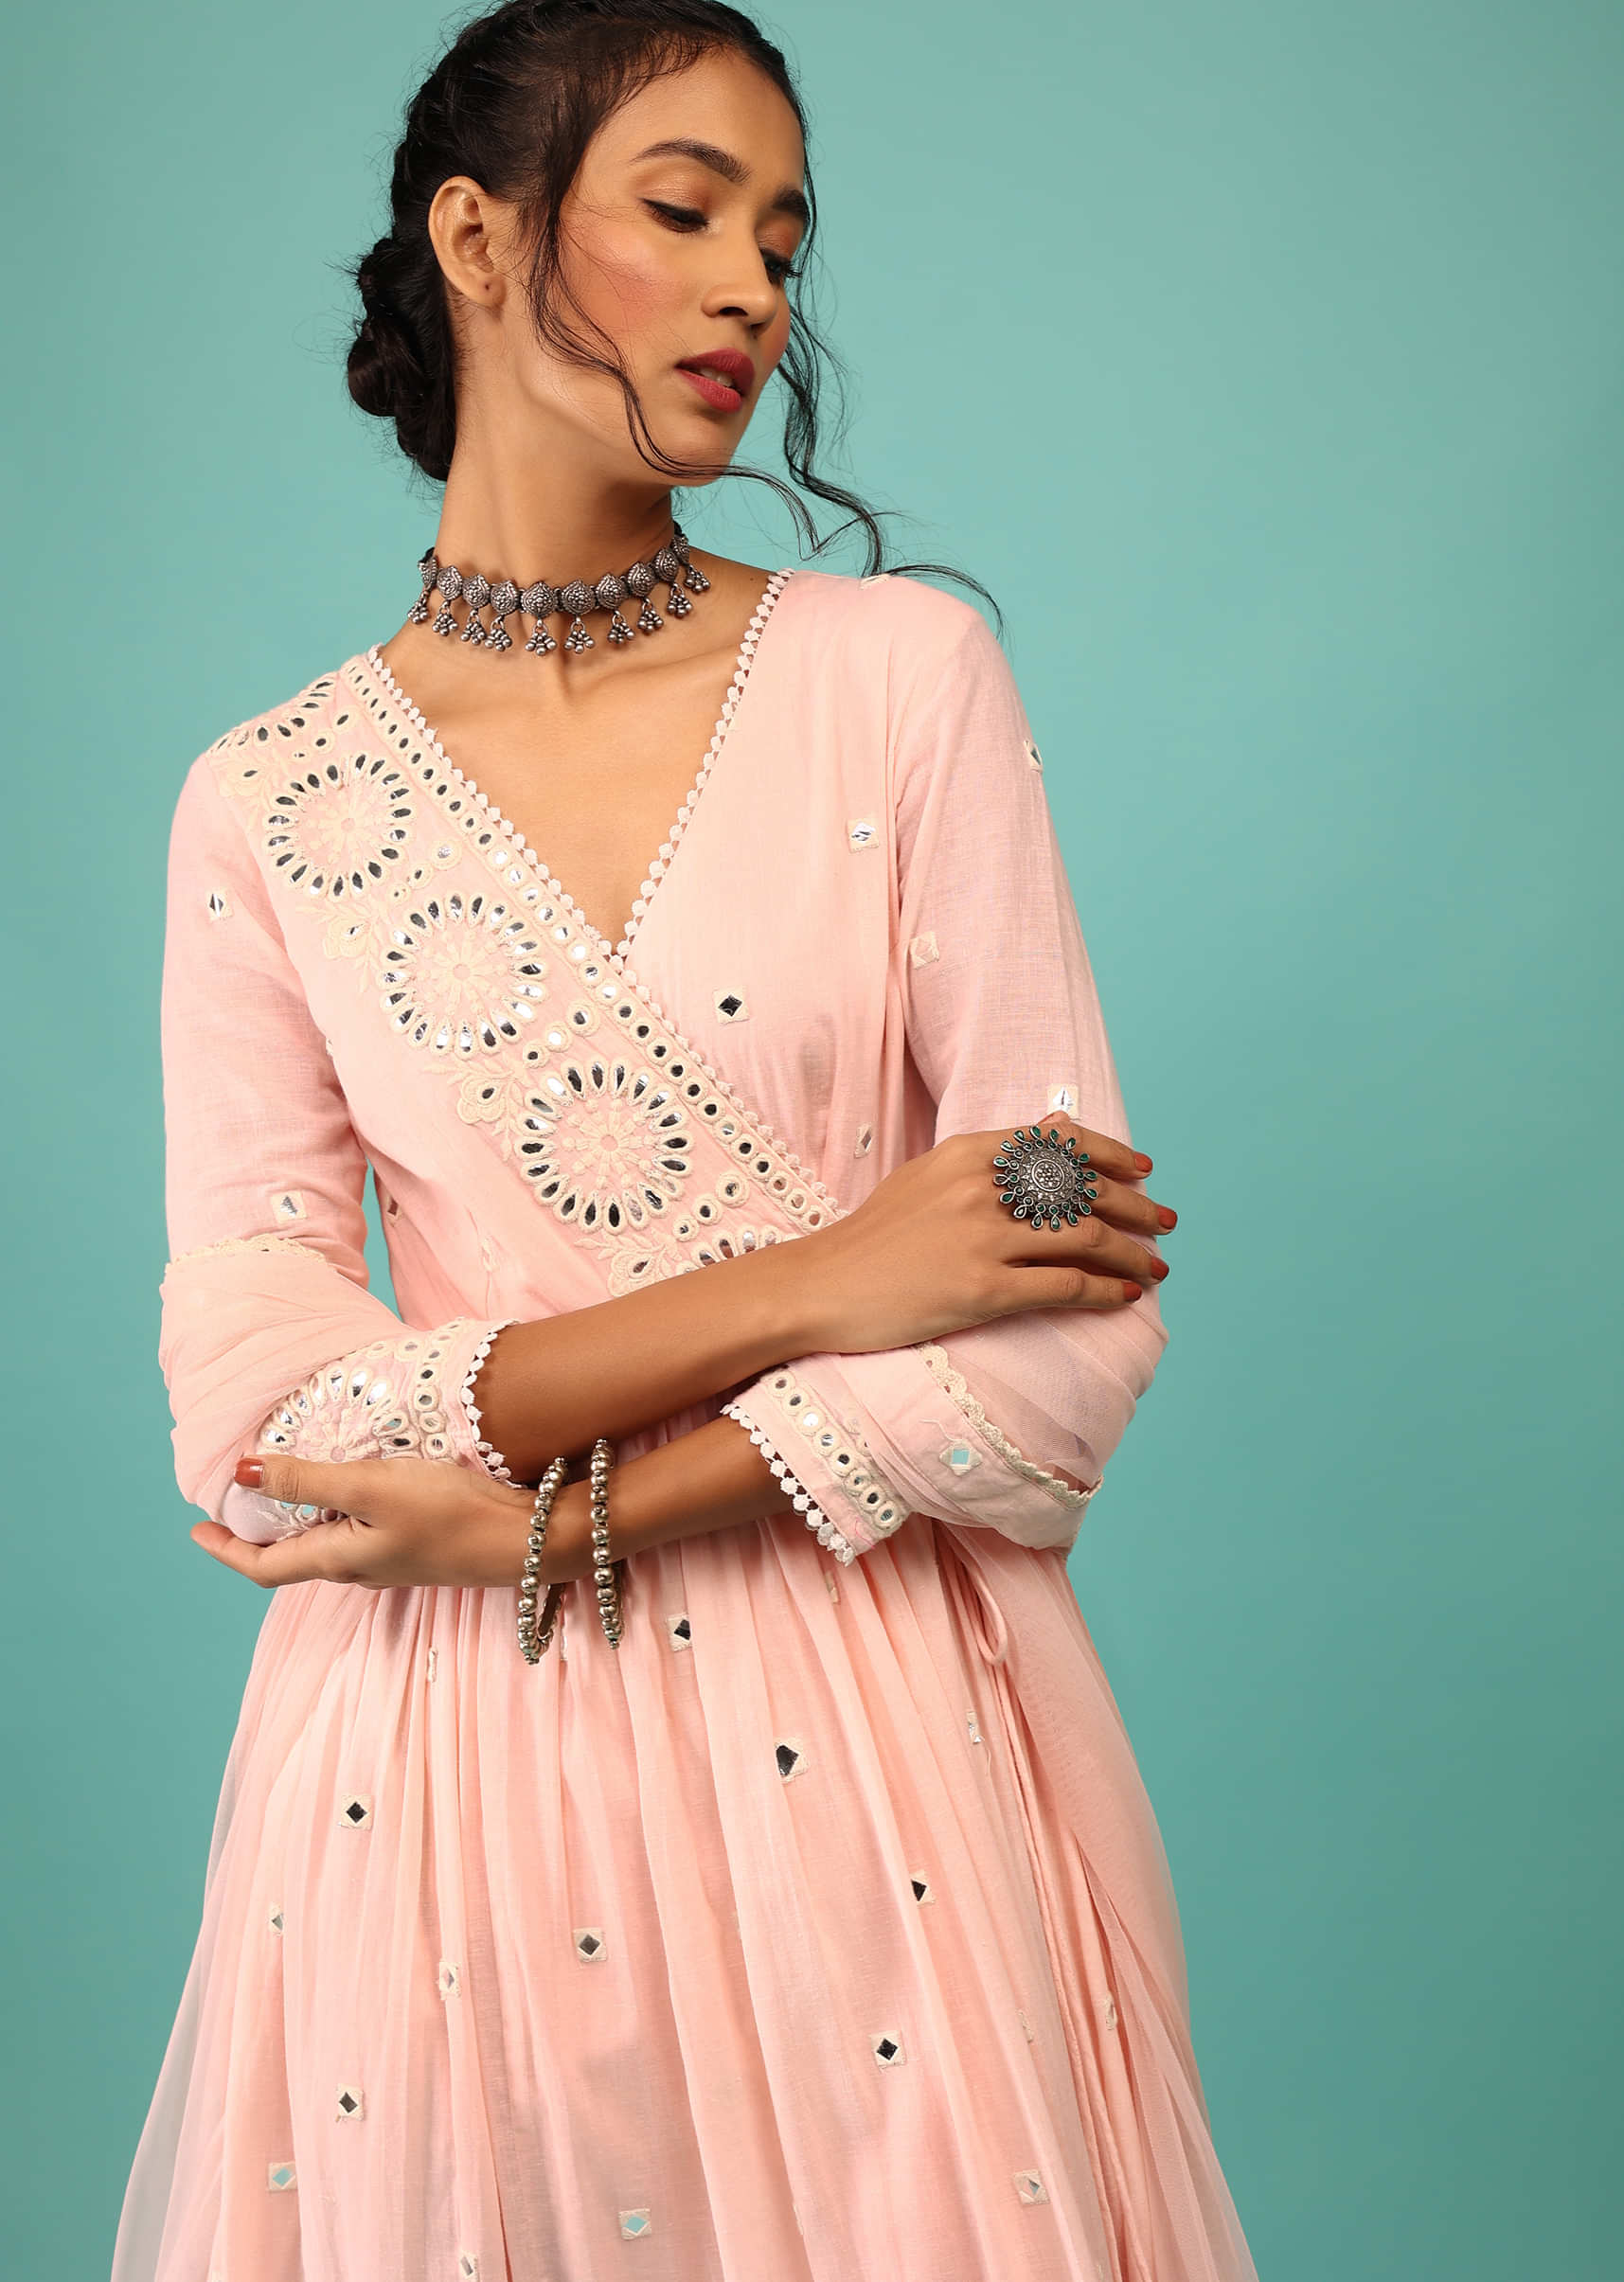 Candy Pink Anarkali Kurta In Floral Lucknowi Embroidery With Angrakha Pattern & Surplice Neckline